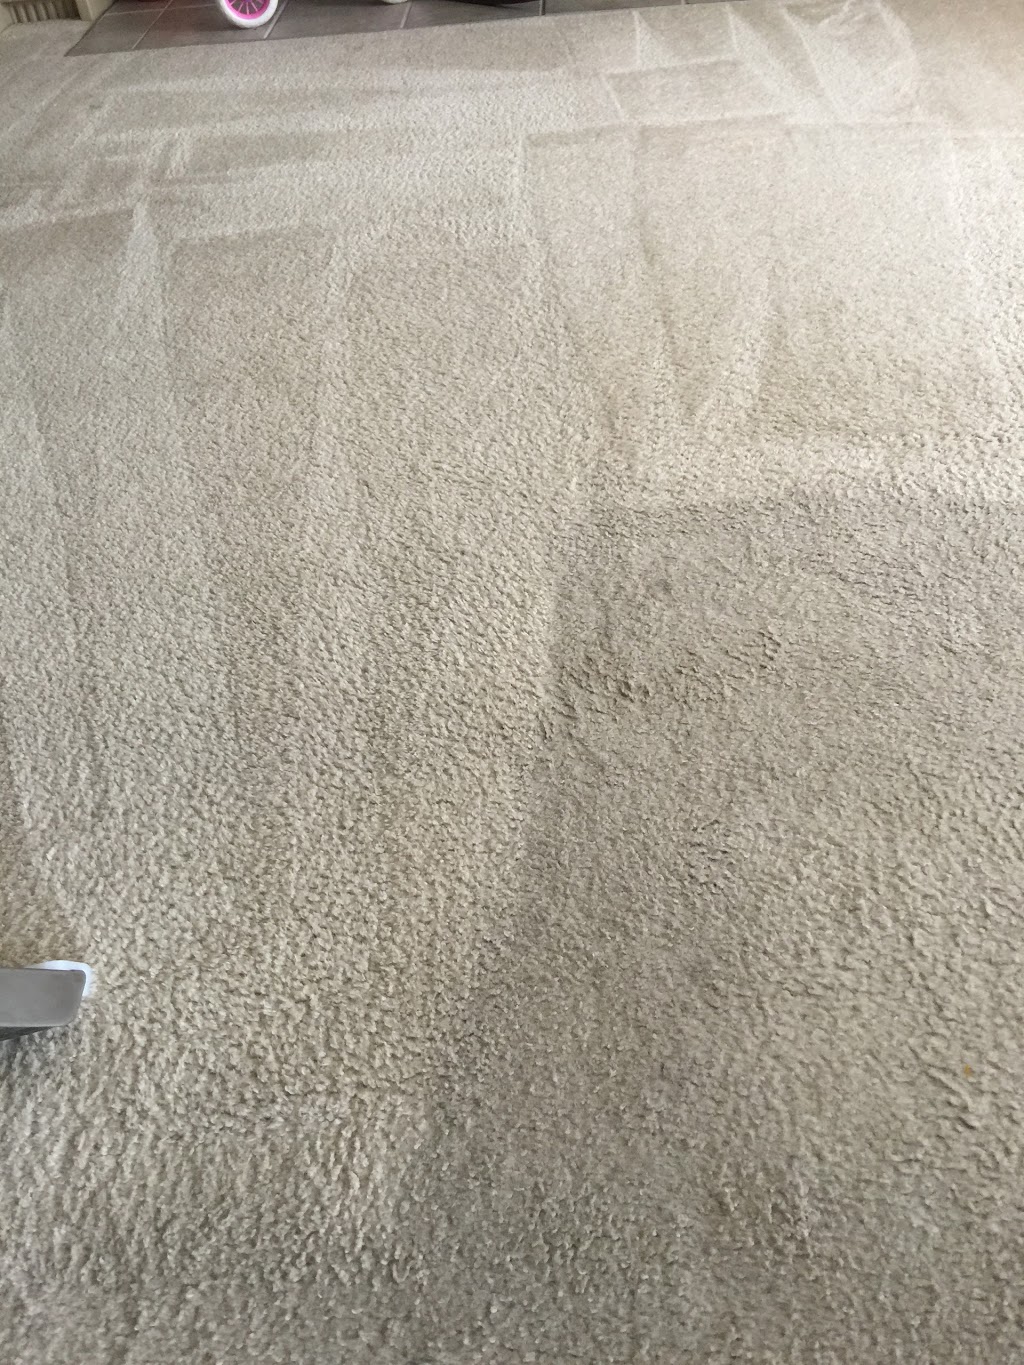 HI-TECH Carpet Cleaning and Restoration | 100 E Campus View Blvd #360, Columbus, OH 43235, USA | Phone: (614) 505-3573